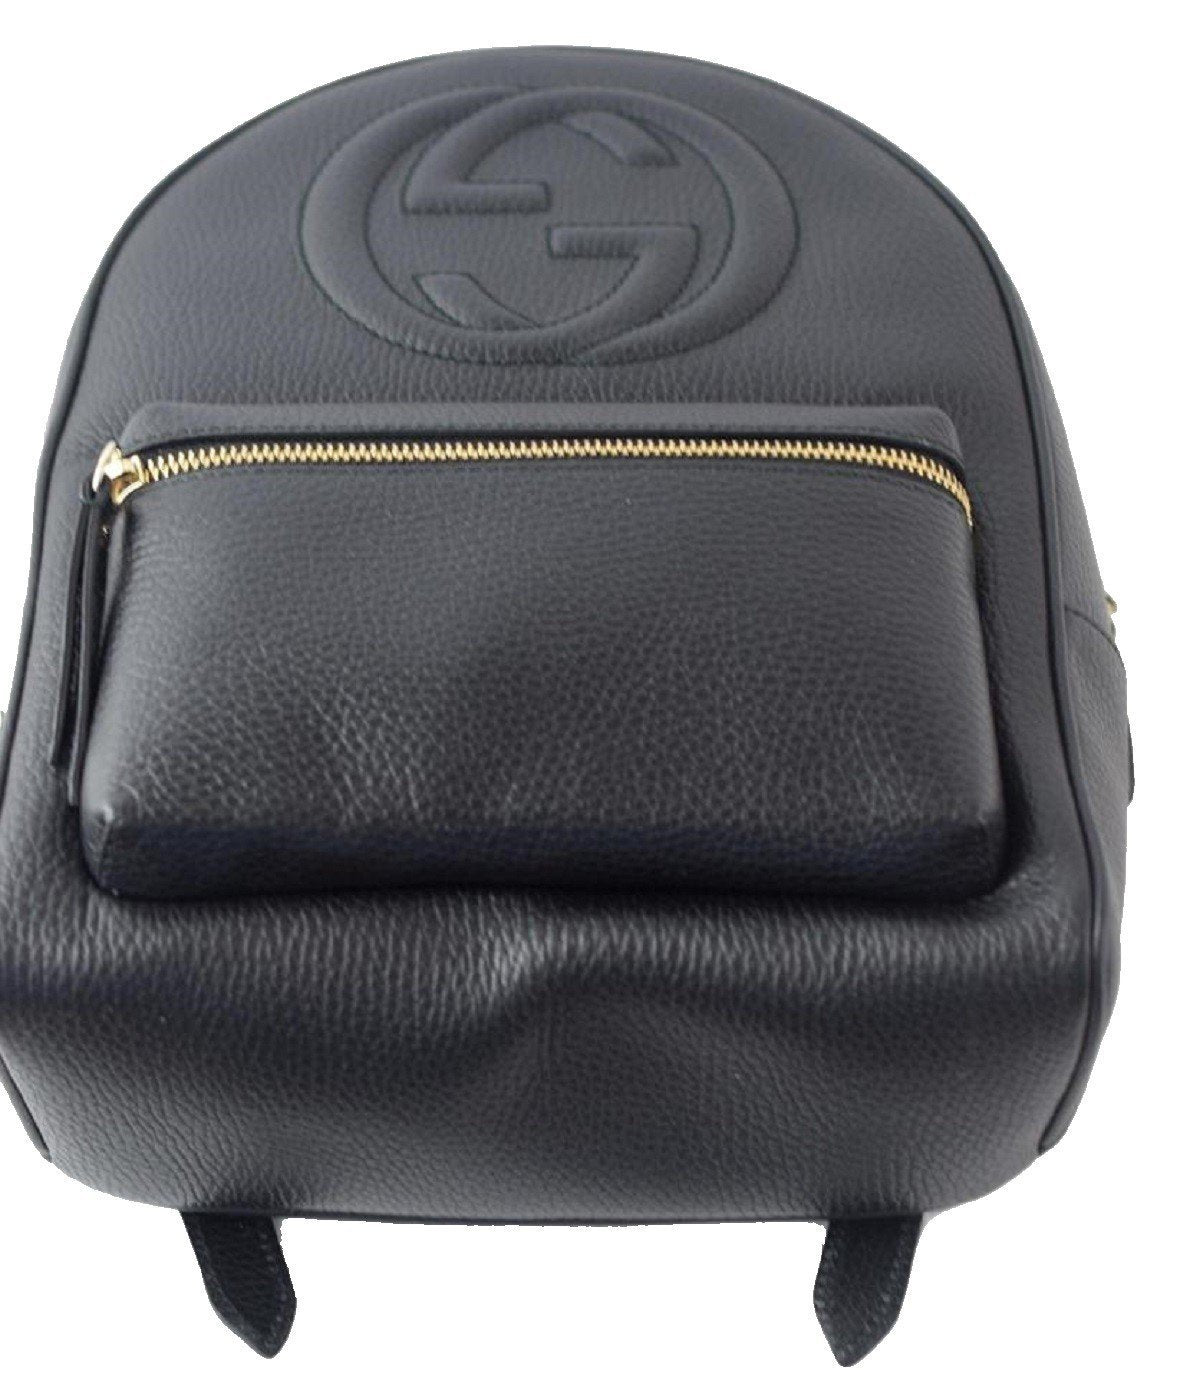 Gucci Soho GG Logo Black Leather Backpack Chain Straps 536192 at_Queen_Bee_of_Beverly_Hills